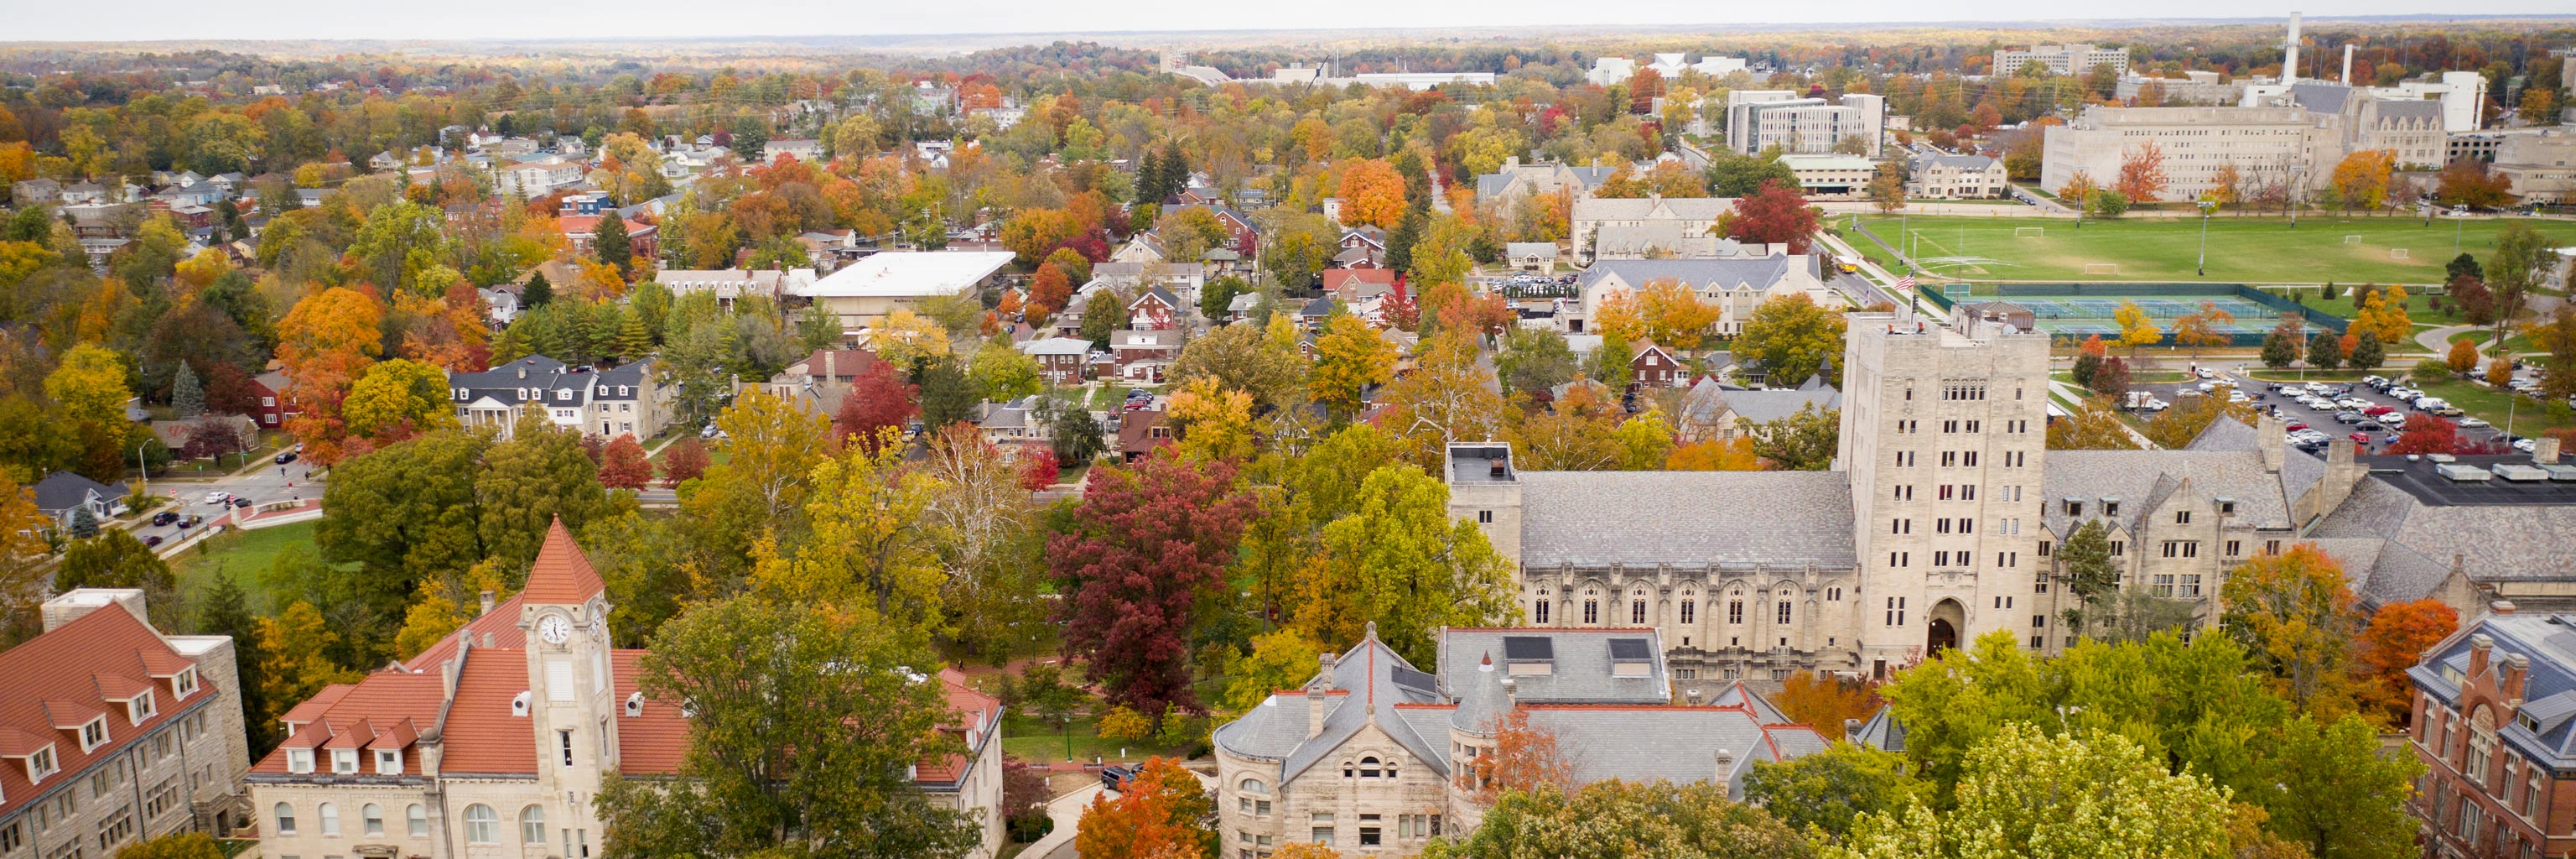 Aerial view of Indiana University campus